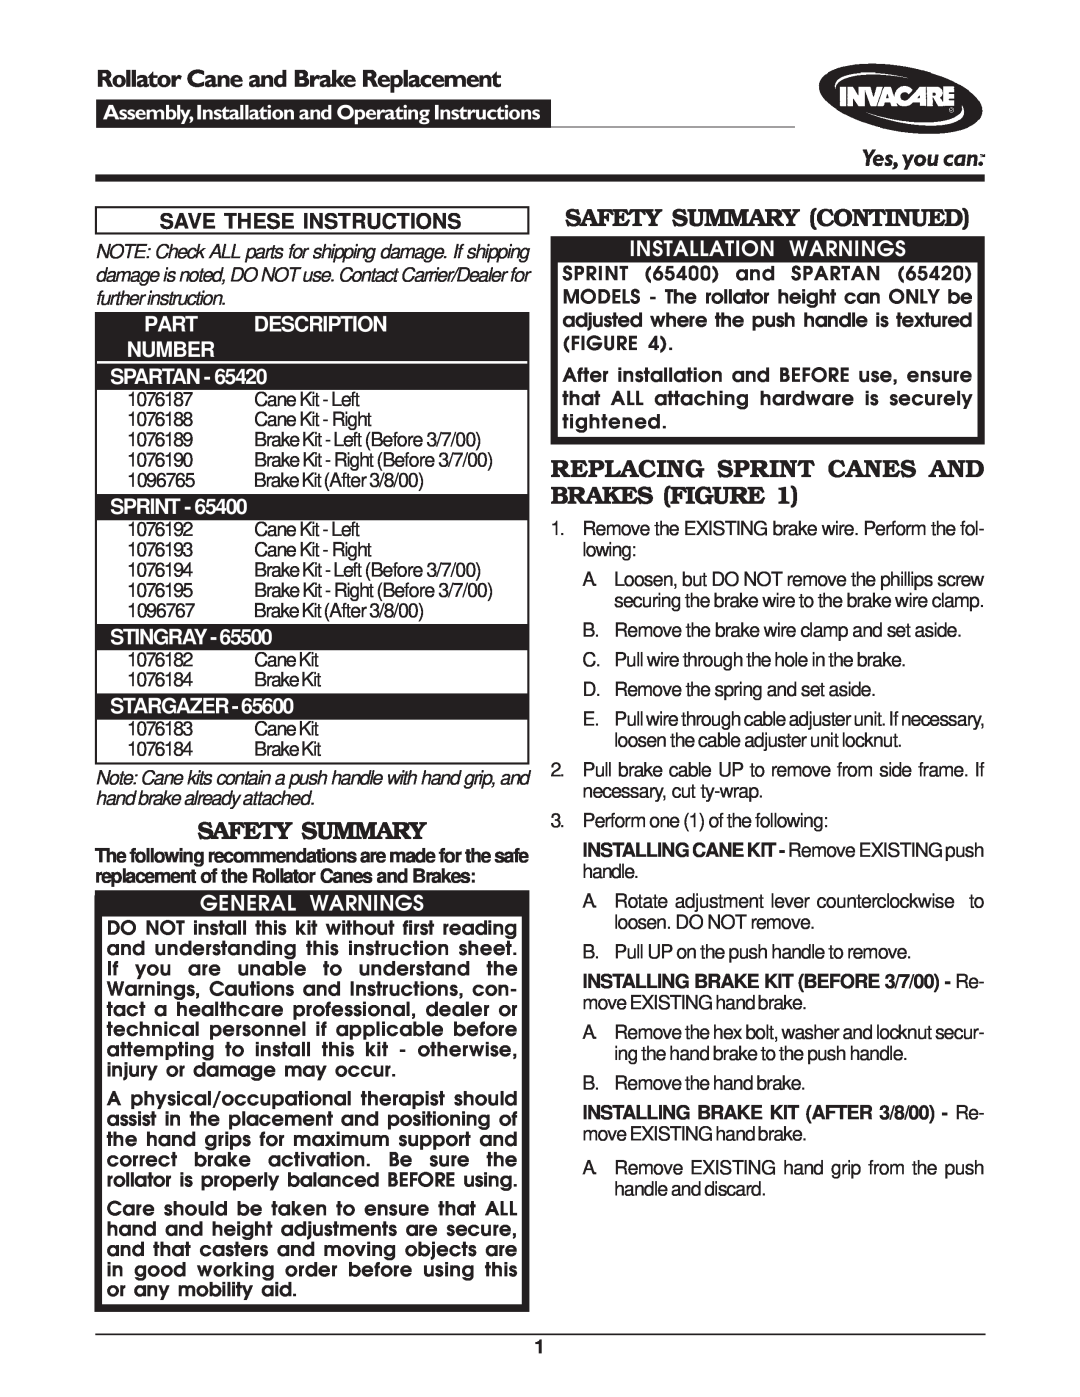 Invacare 65600 operating instructions Safety Summary Continued, Replacing Sprint Canes And Brakes Figure, Stingray 